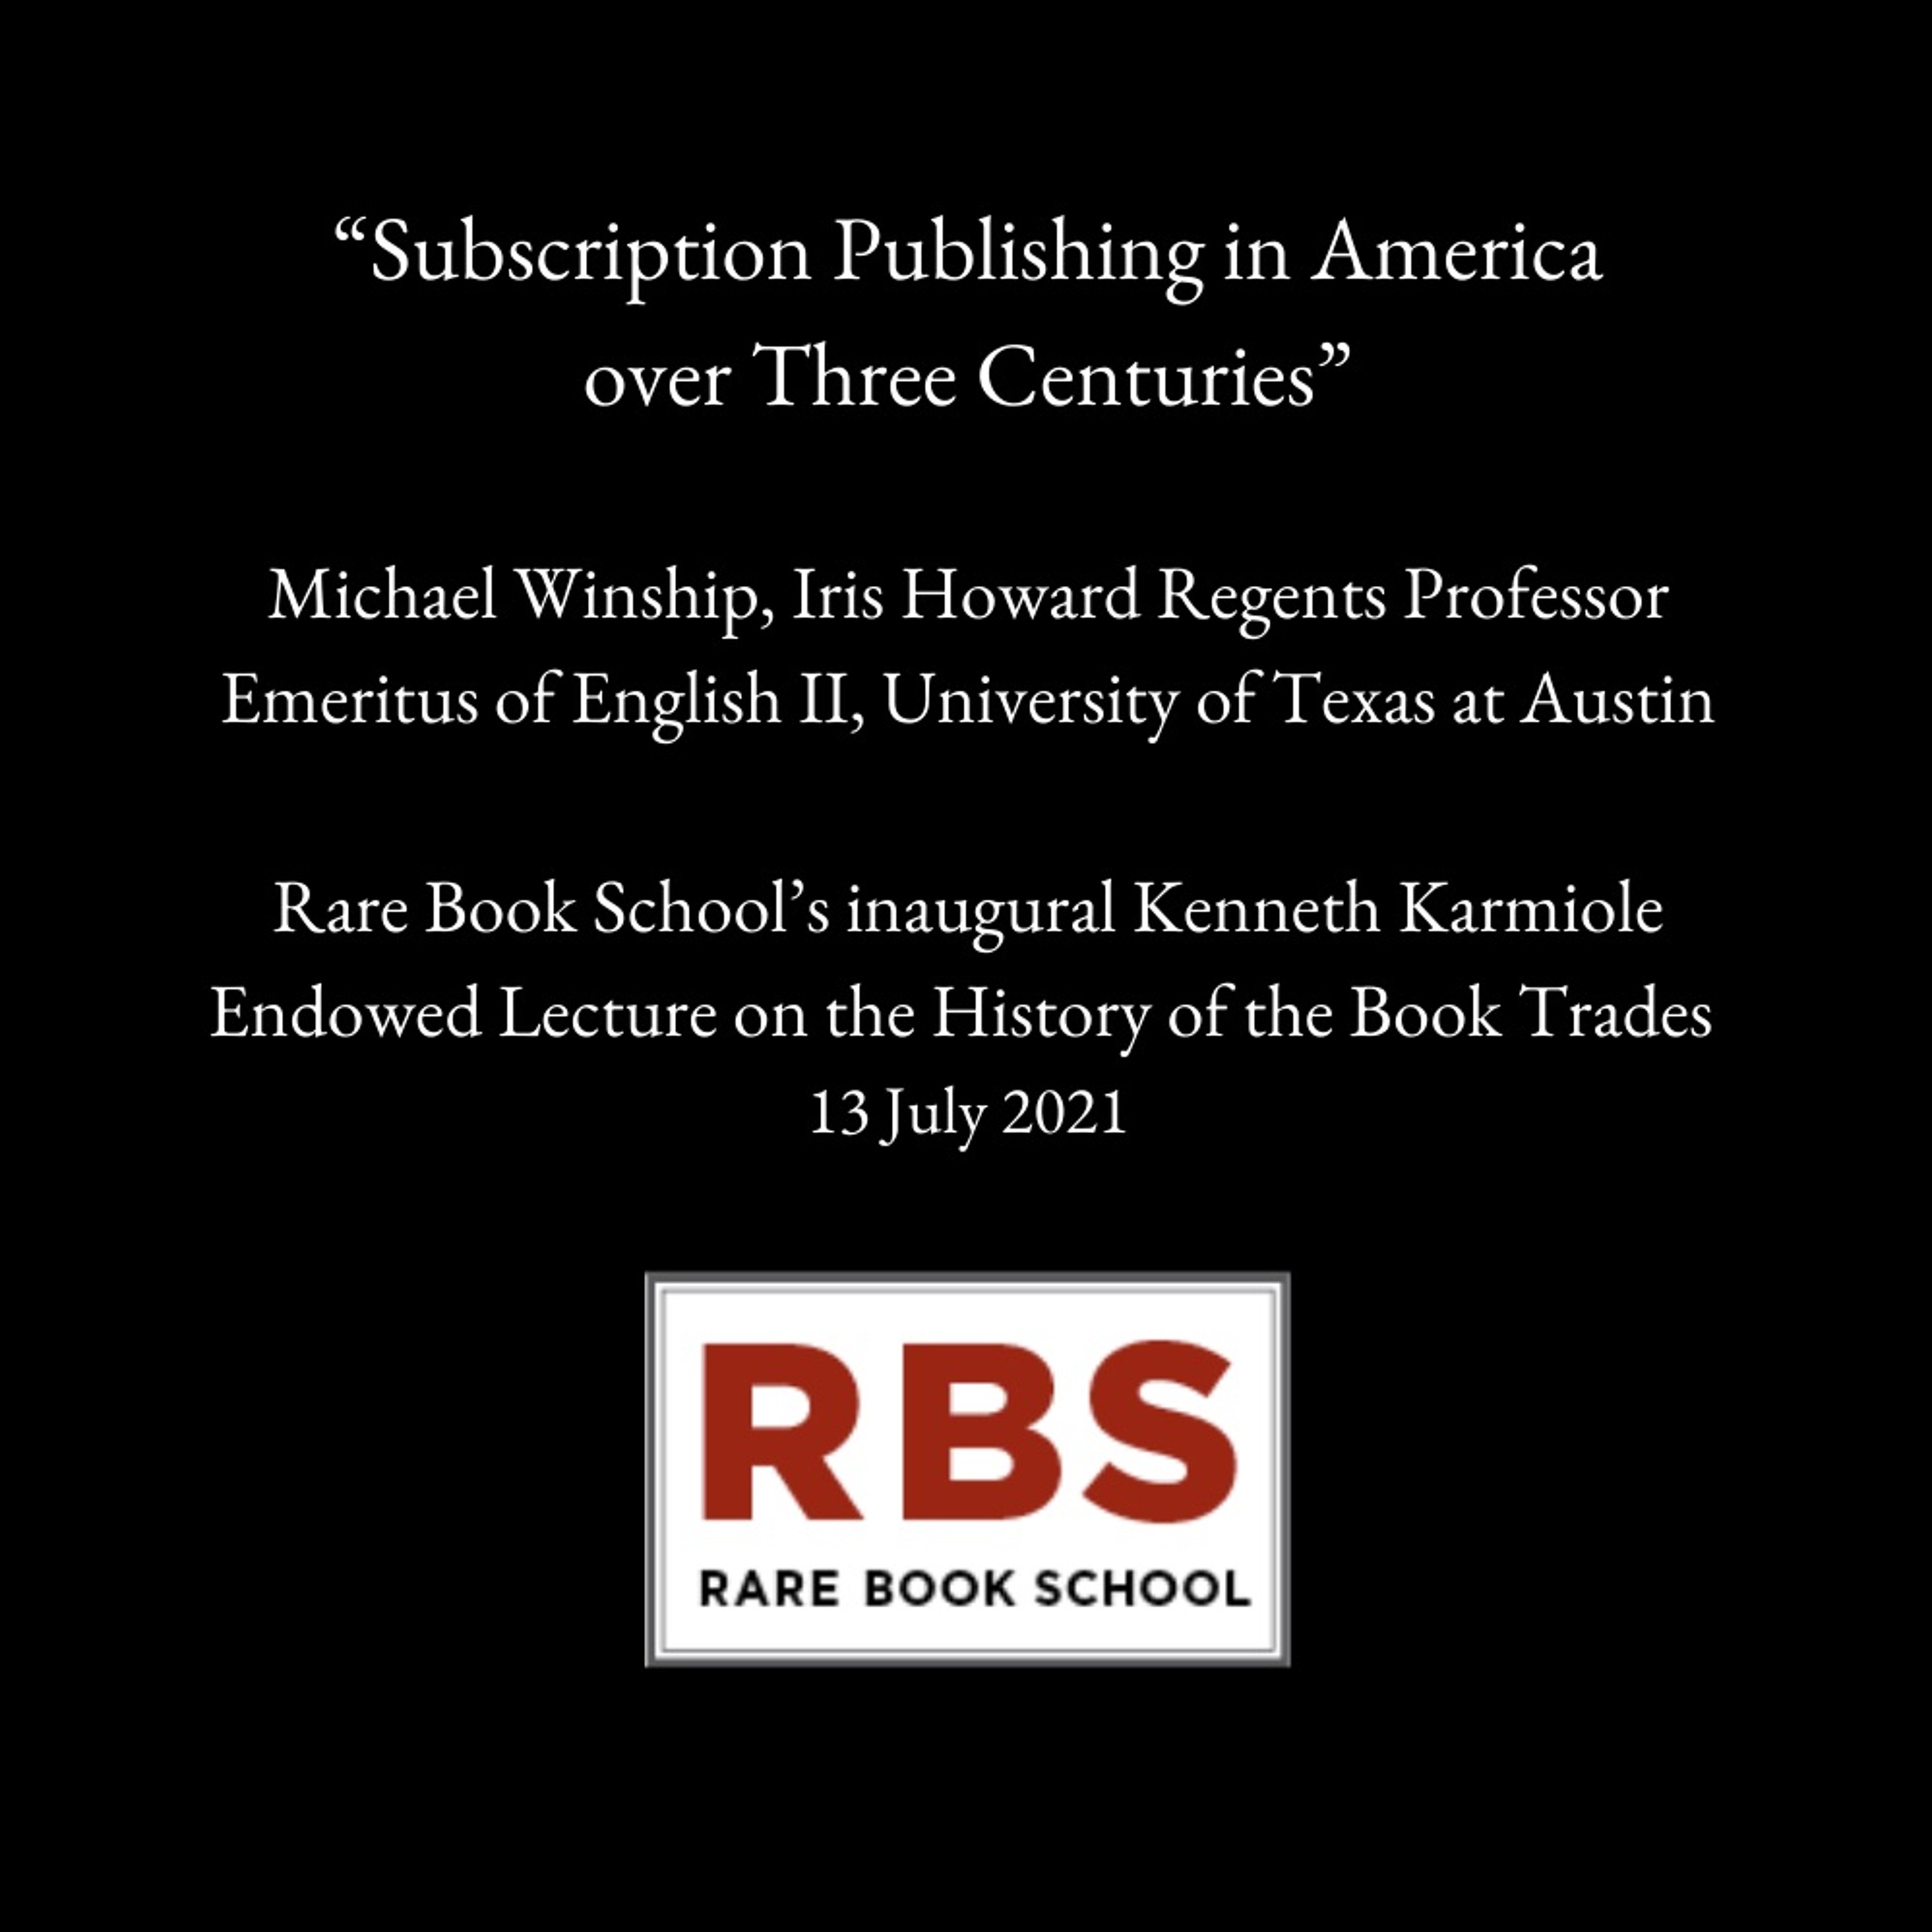 Winship - Subscription Publishing in America over Three Centuries - Karmiole Lecture, 13 July 2021